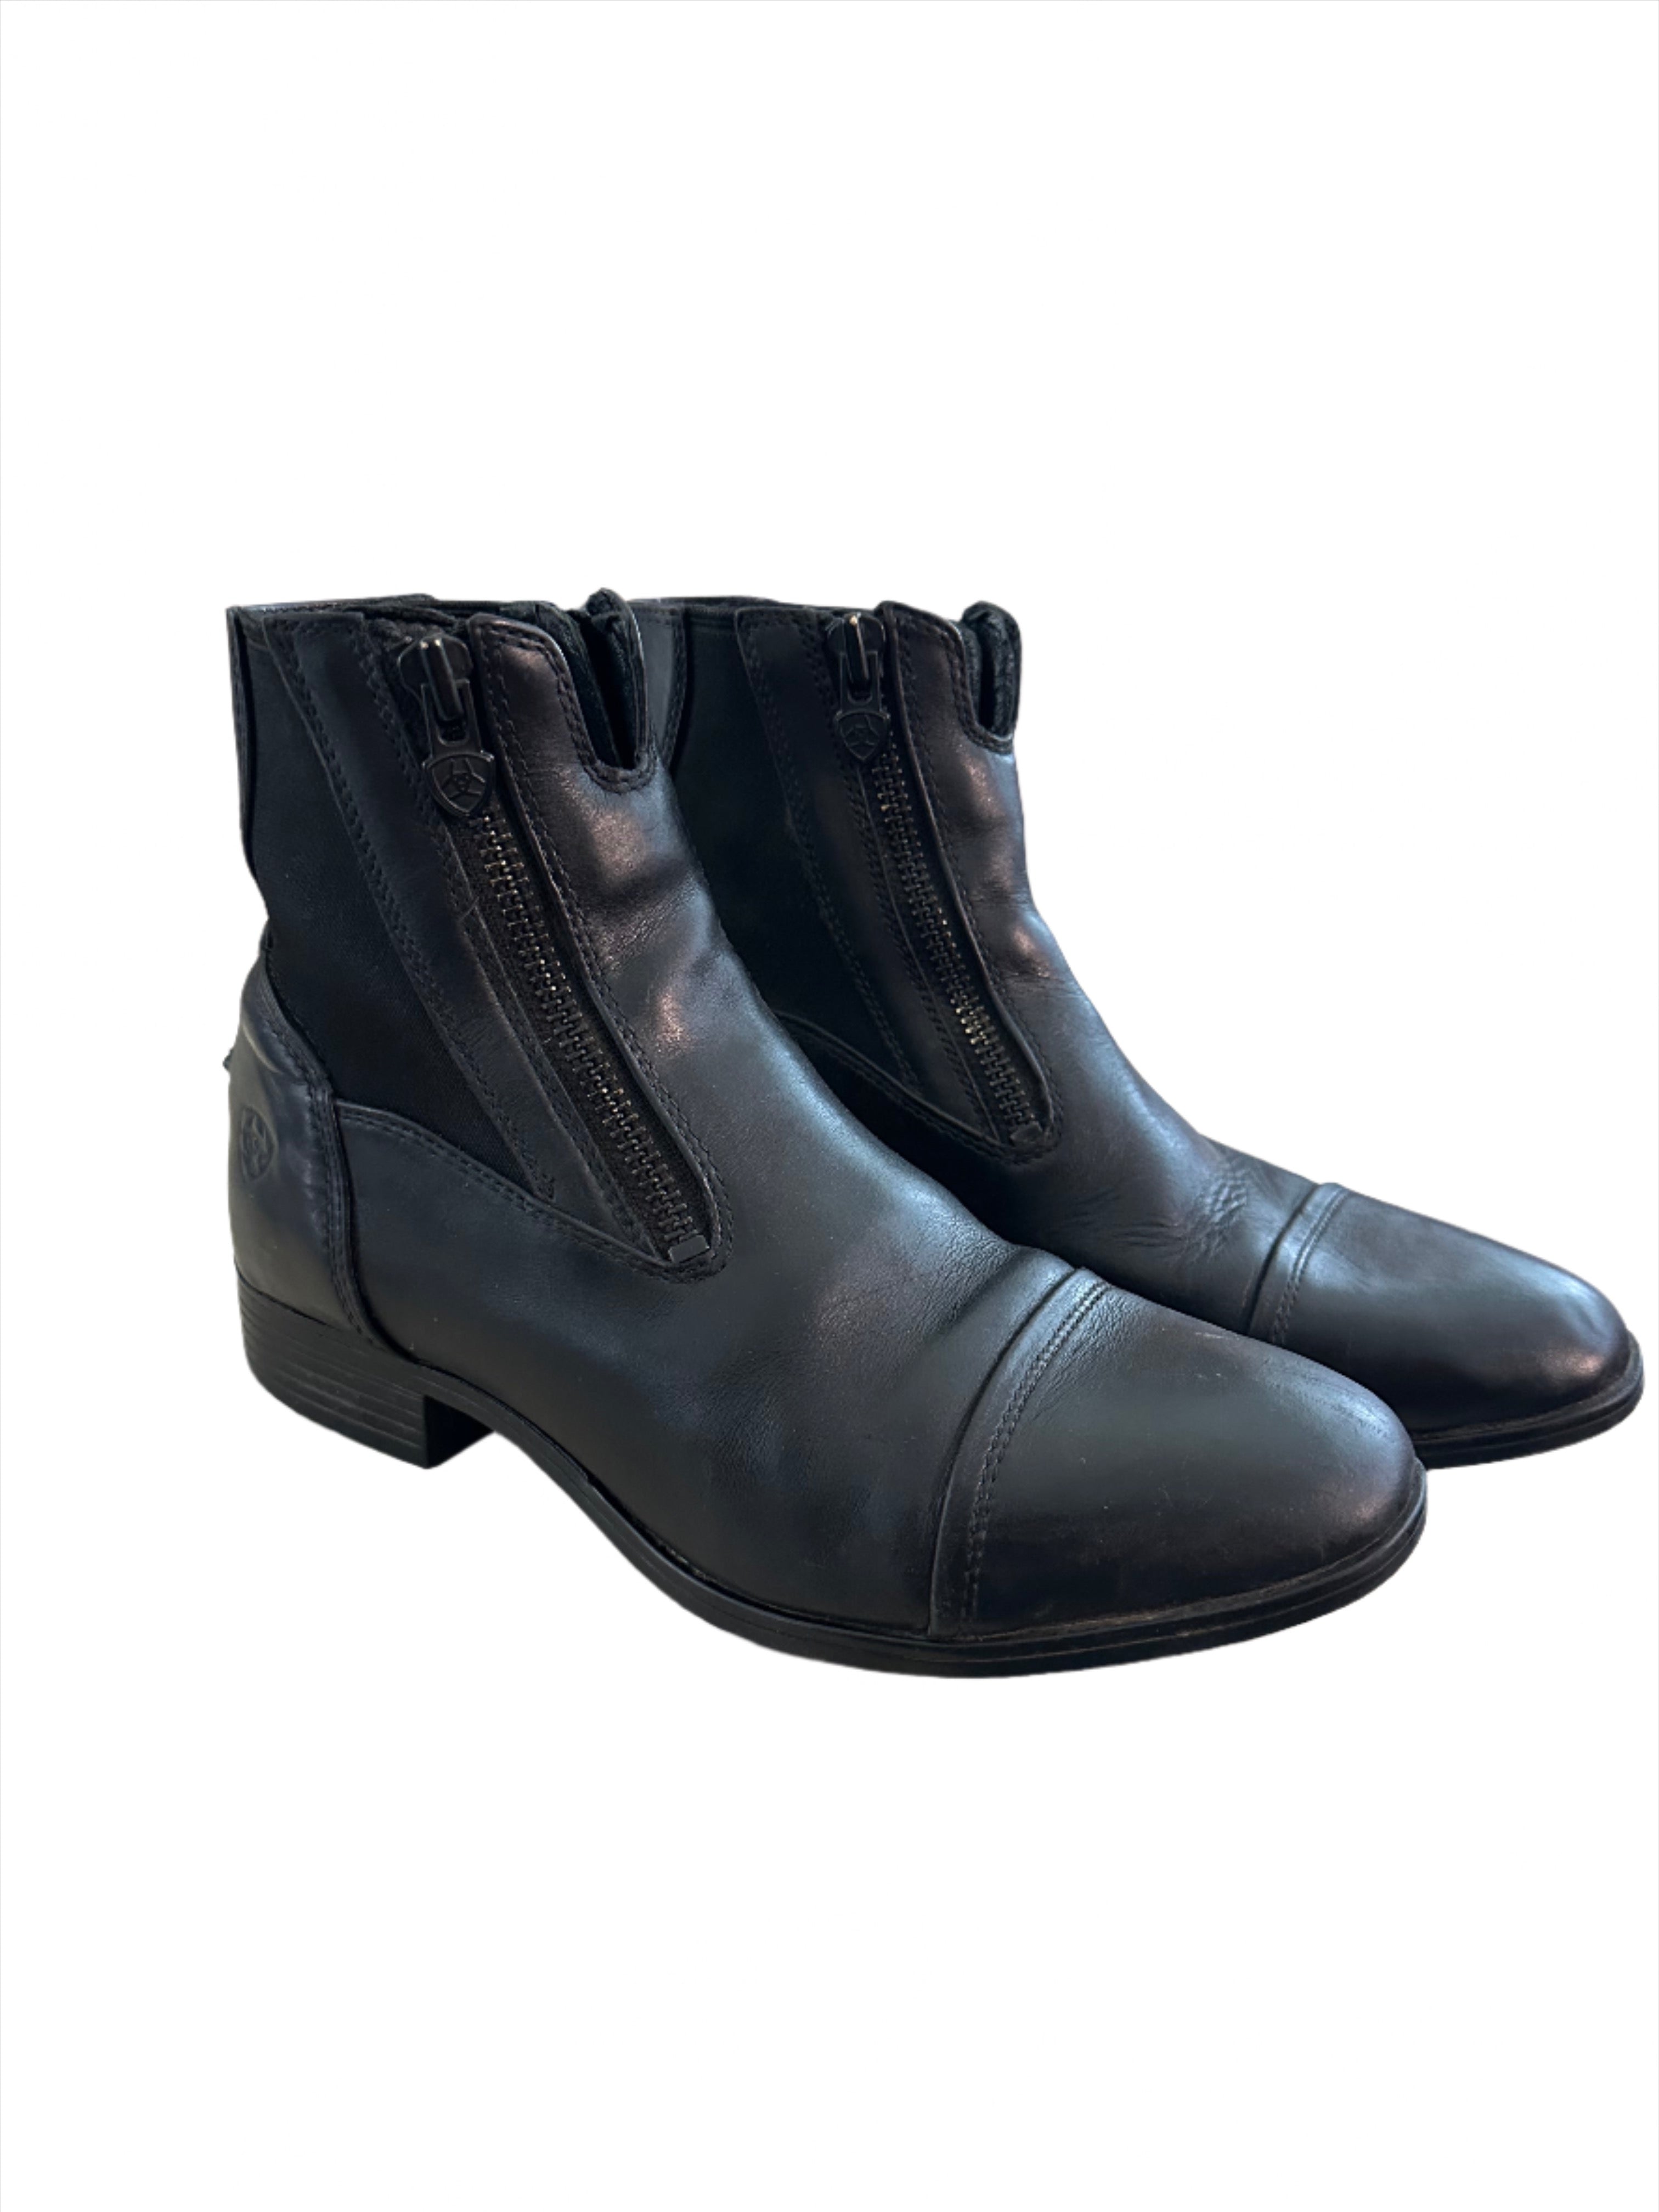 PRE-LOVED KENDRON PRO WOMEN PADDOCK BOOT